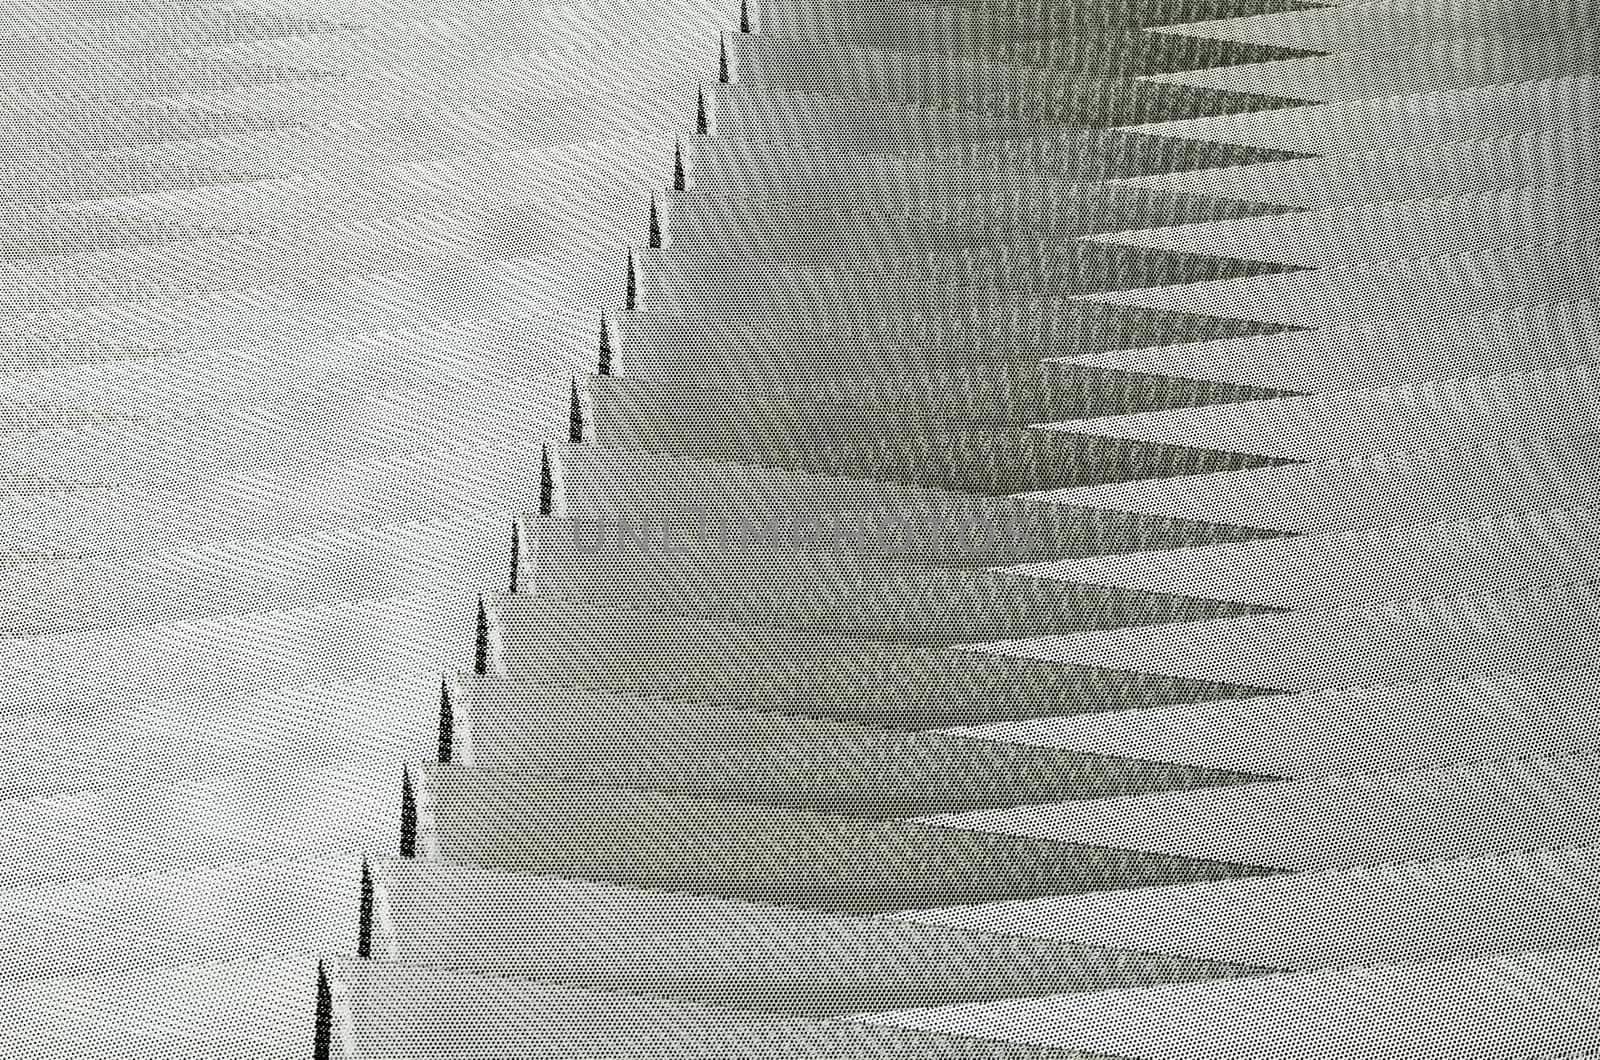 Detail of the metallic pattern from the face of the Navarrabiomed building in Pamplona, Navarra, Spain